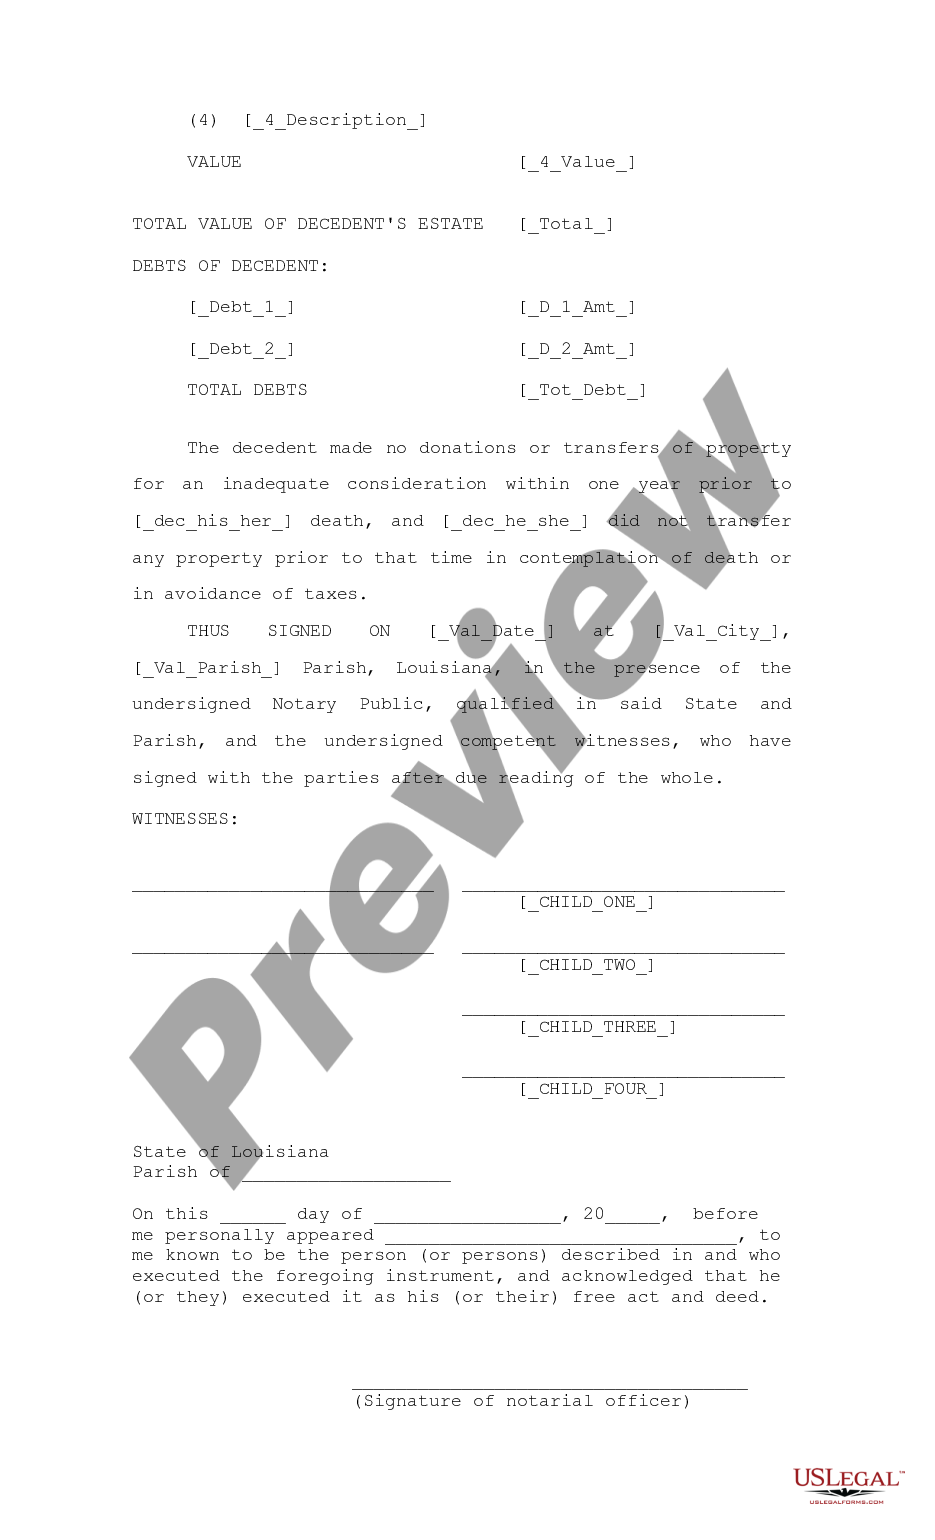 louisiana-petition-for-possession-and-affidavit-of-valuation-and